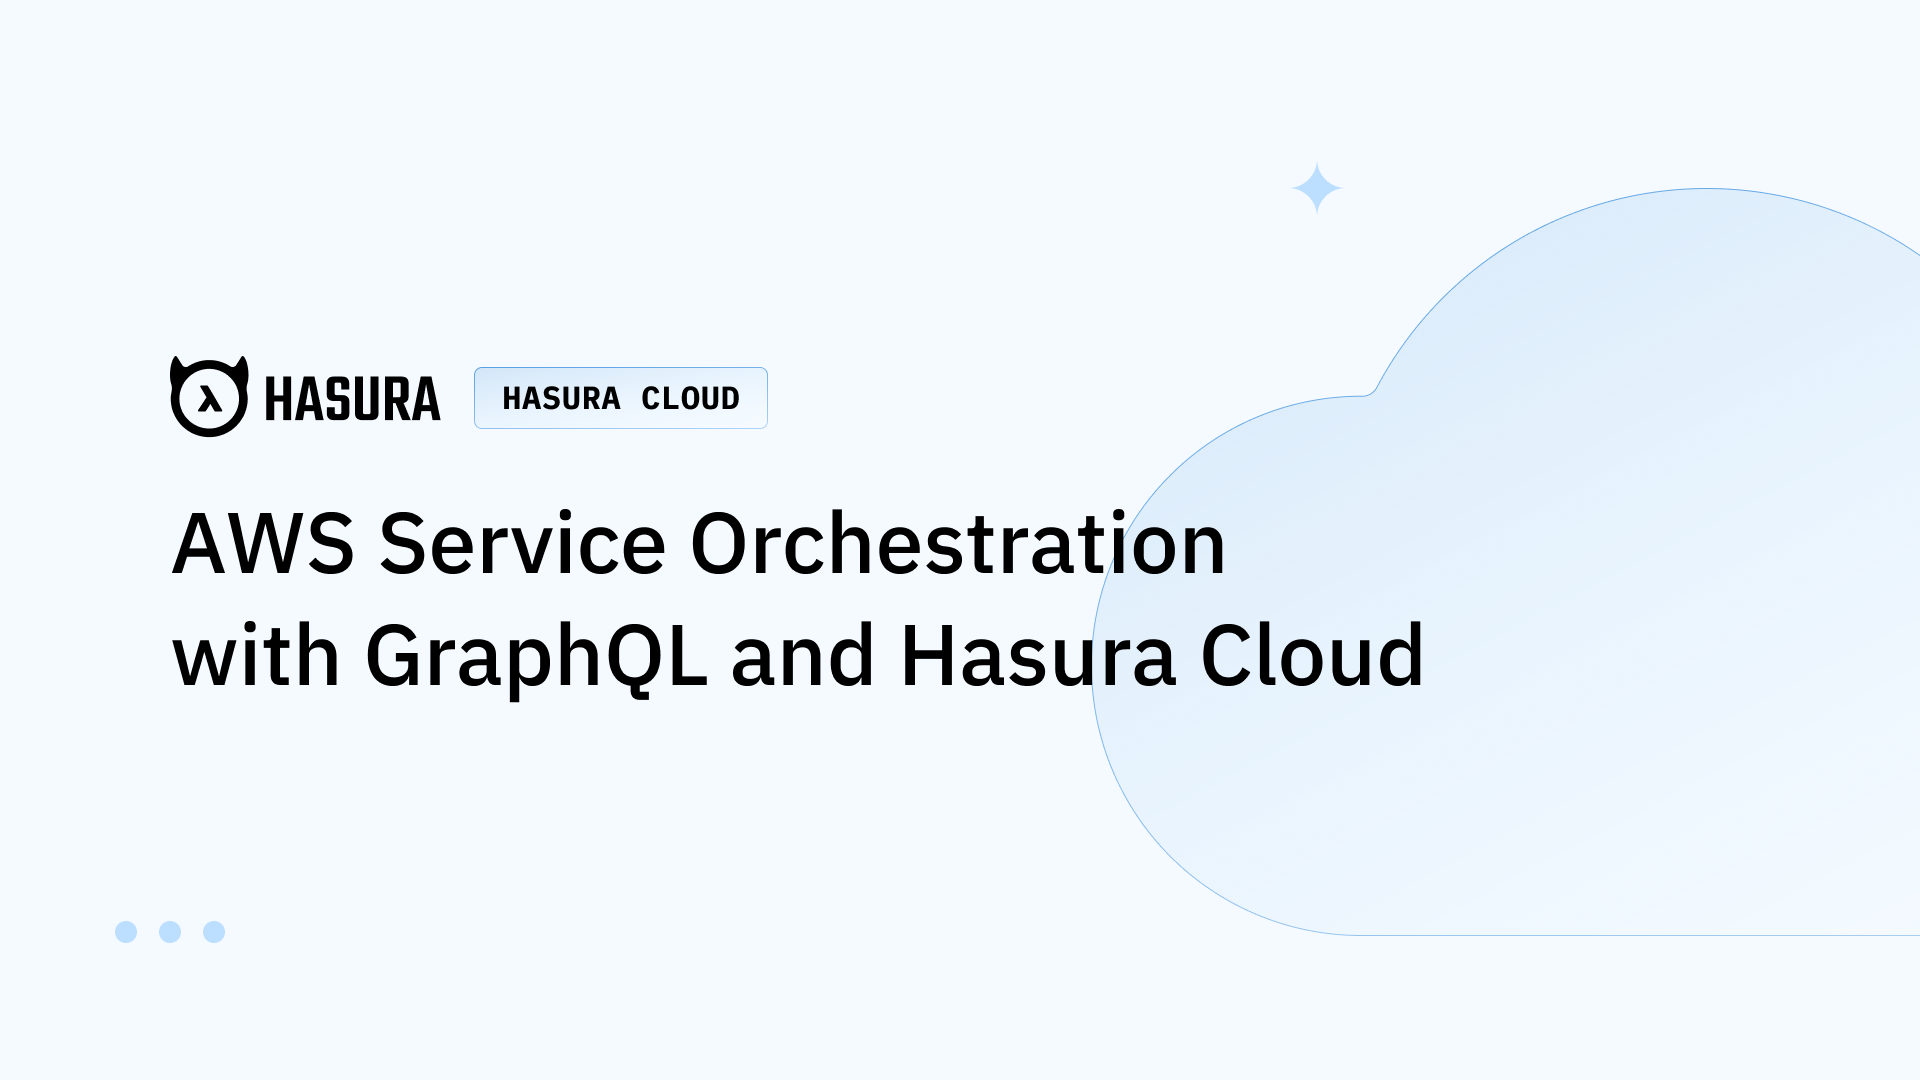 AWS Service Orchestration with GraphQL and Hasura Cloud